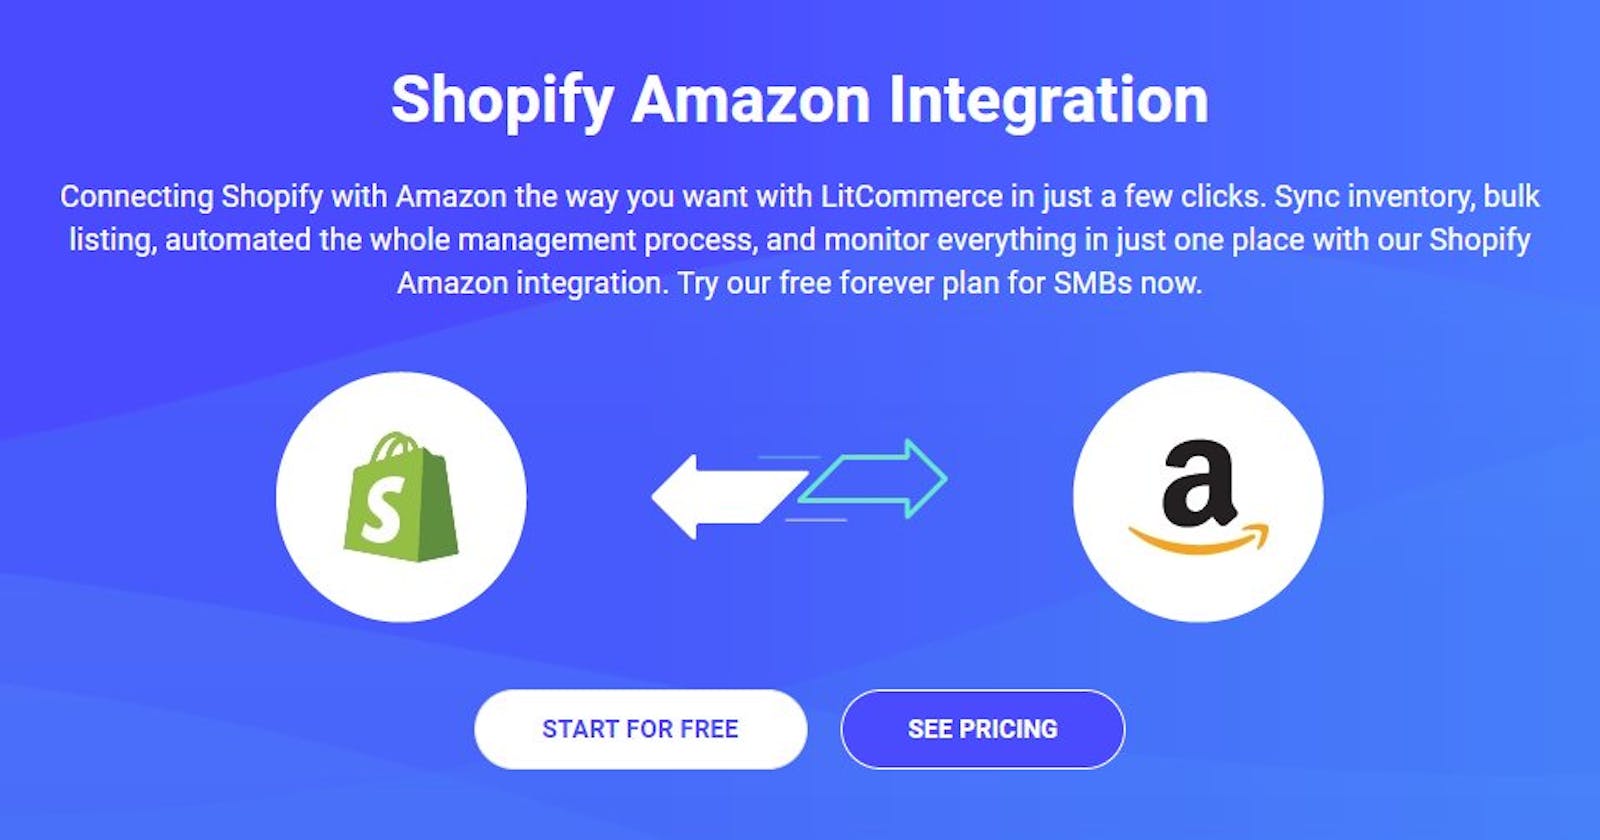 Connecting Shopify with Amazon using LitCommerce